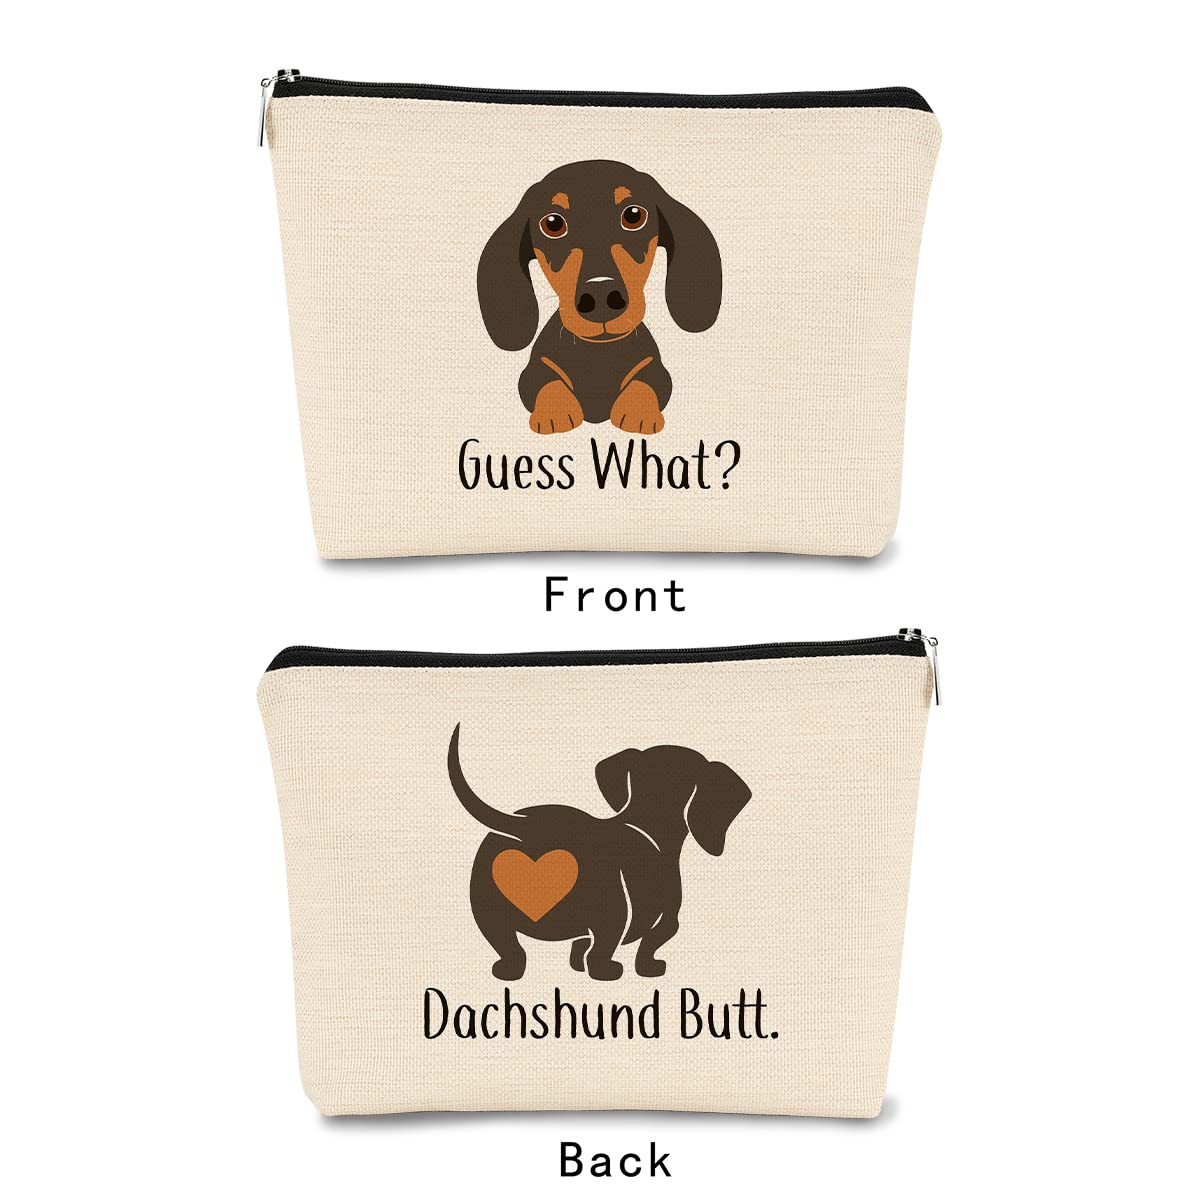 BARPERY Funny Dachshund Makeup Bag,Guess What It's Pug Butt Cartoon Cute Sausage Dog Puppy Cosmetic Bag Best Gift Idea for Dog Loves,Birthday for Dachshund Mom Girls Women， Teen Girls Daughter